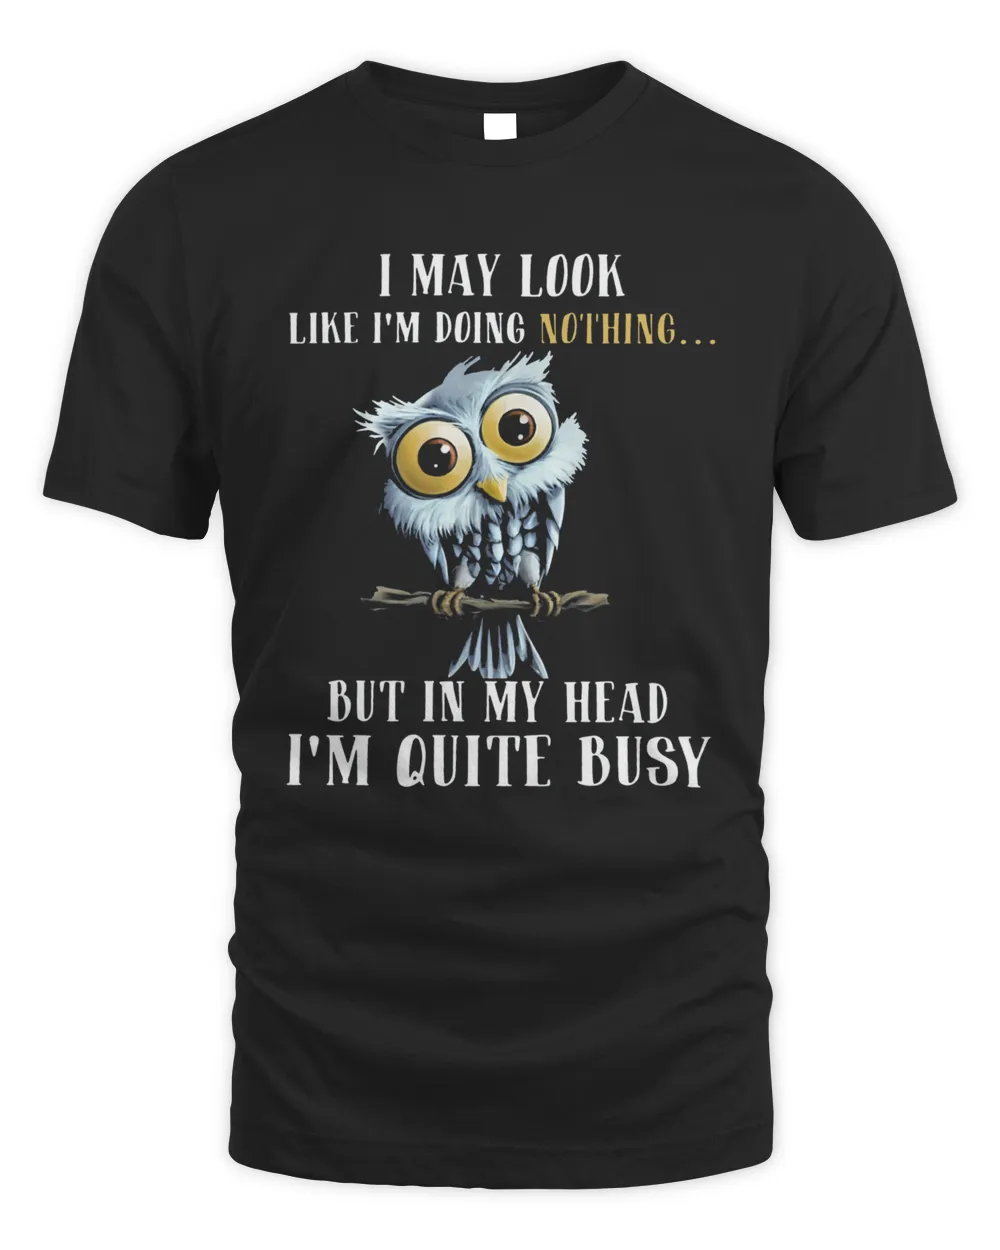 Owl I May Look Like I'm Doing Nothing But In My Head I'm Quite Busy Shirt